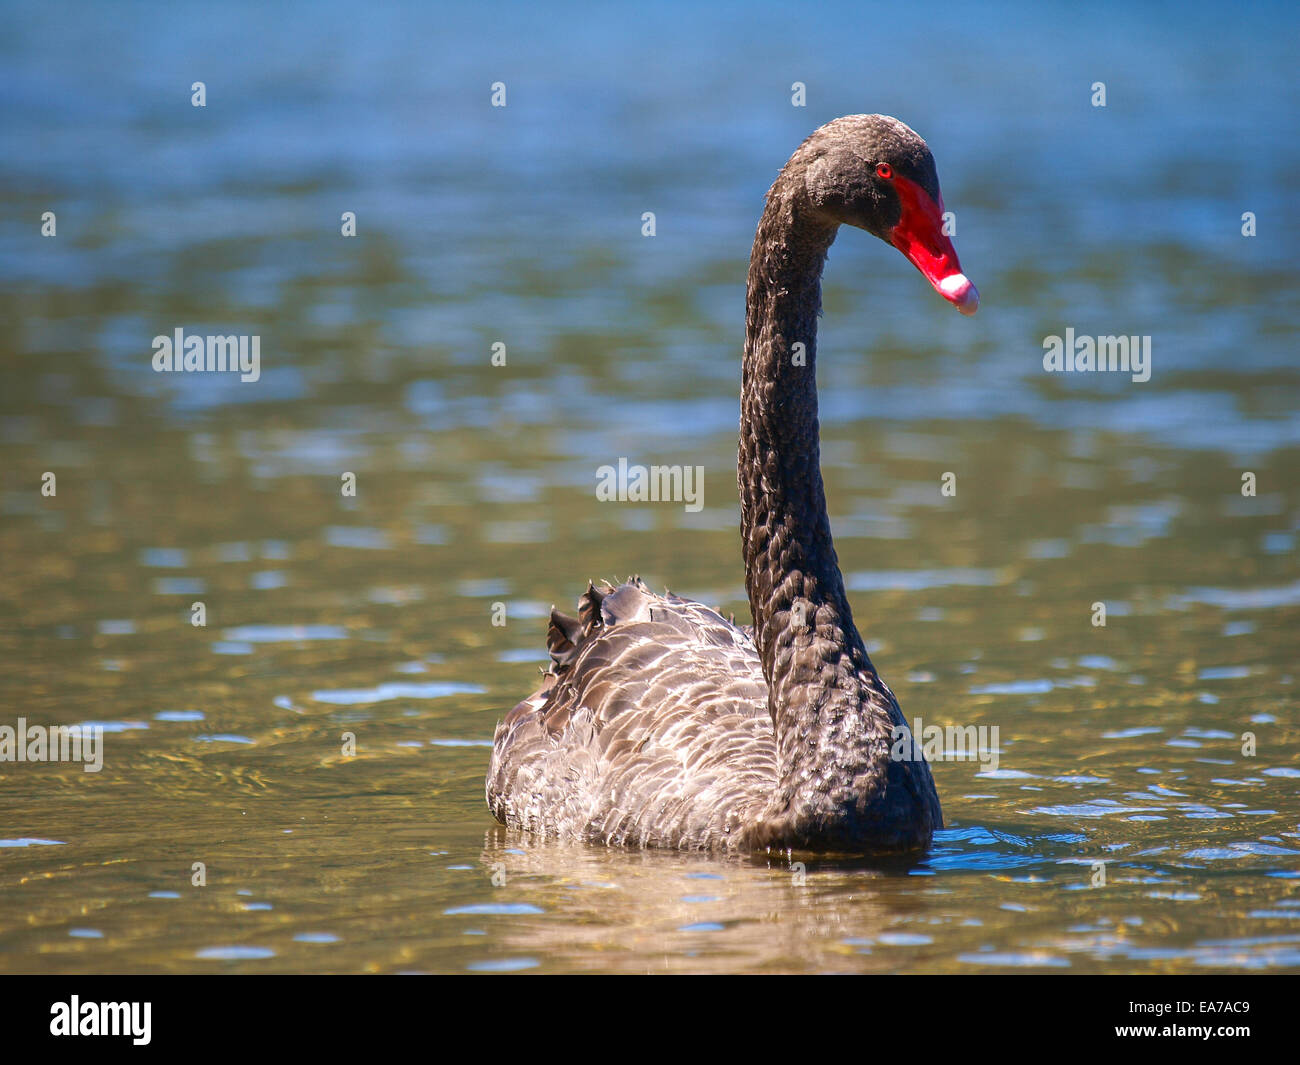 A black swan swimming on a pool of blue water Stock Photo